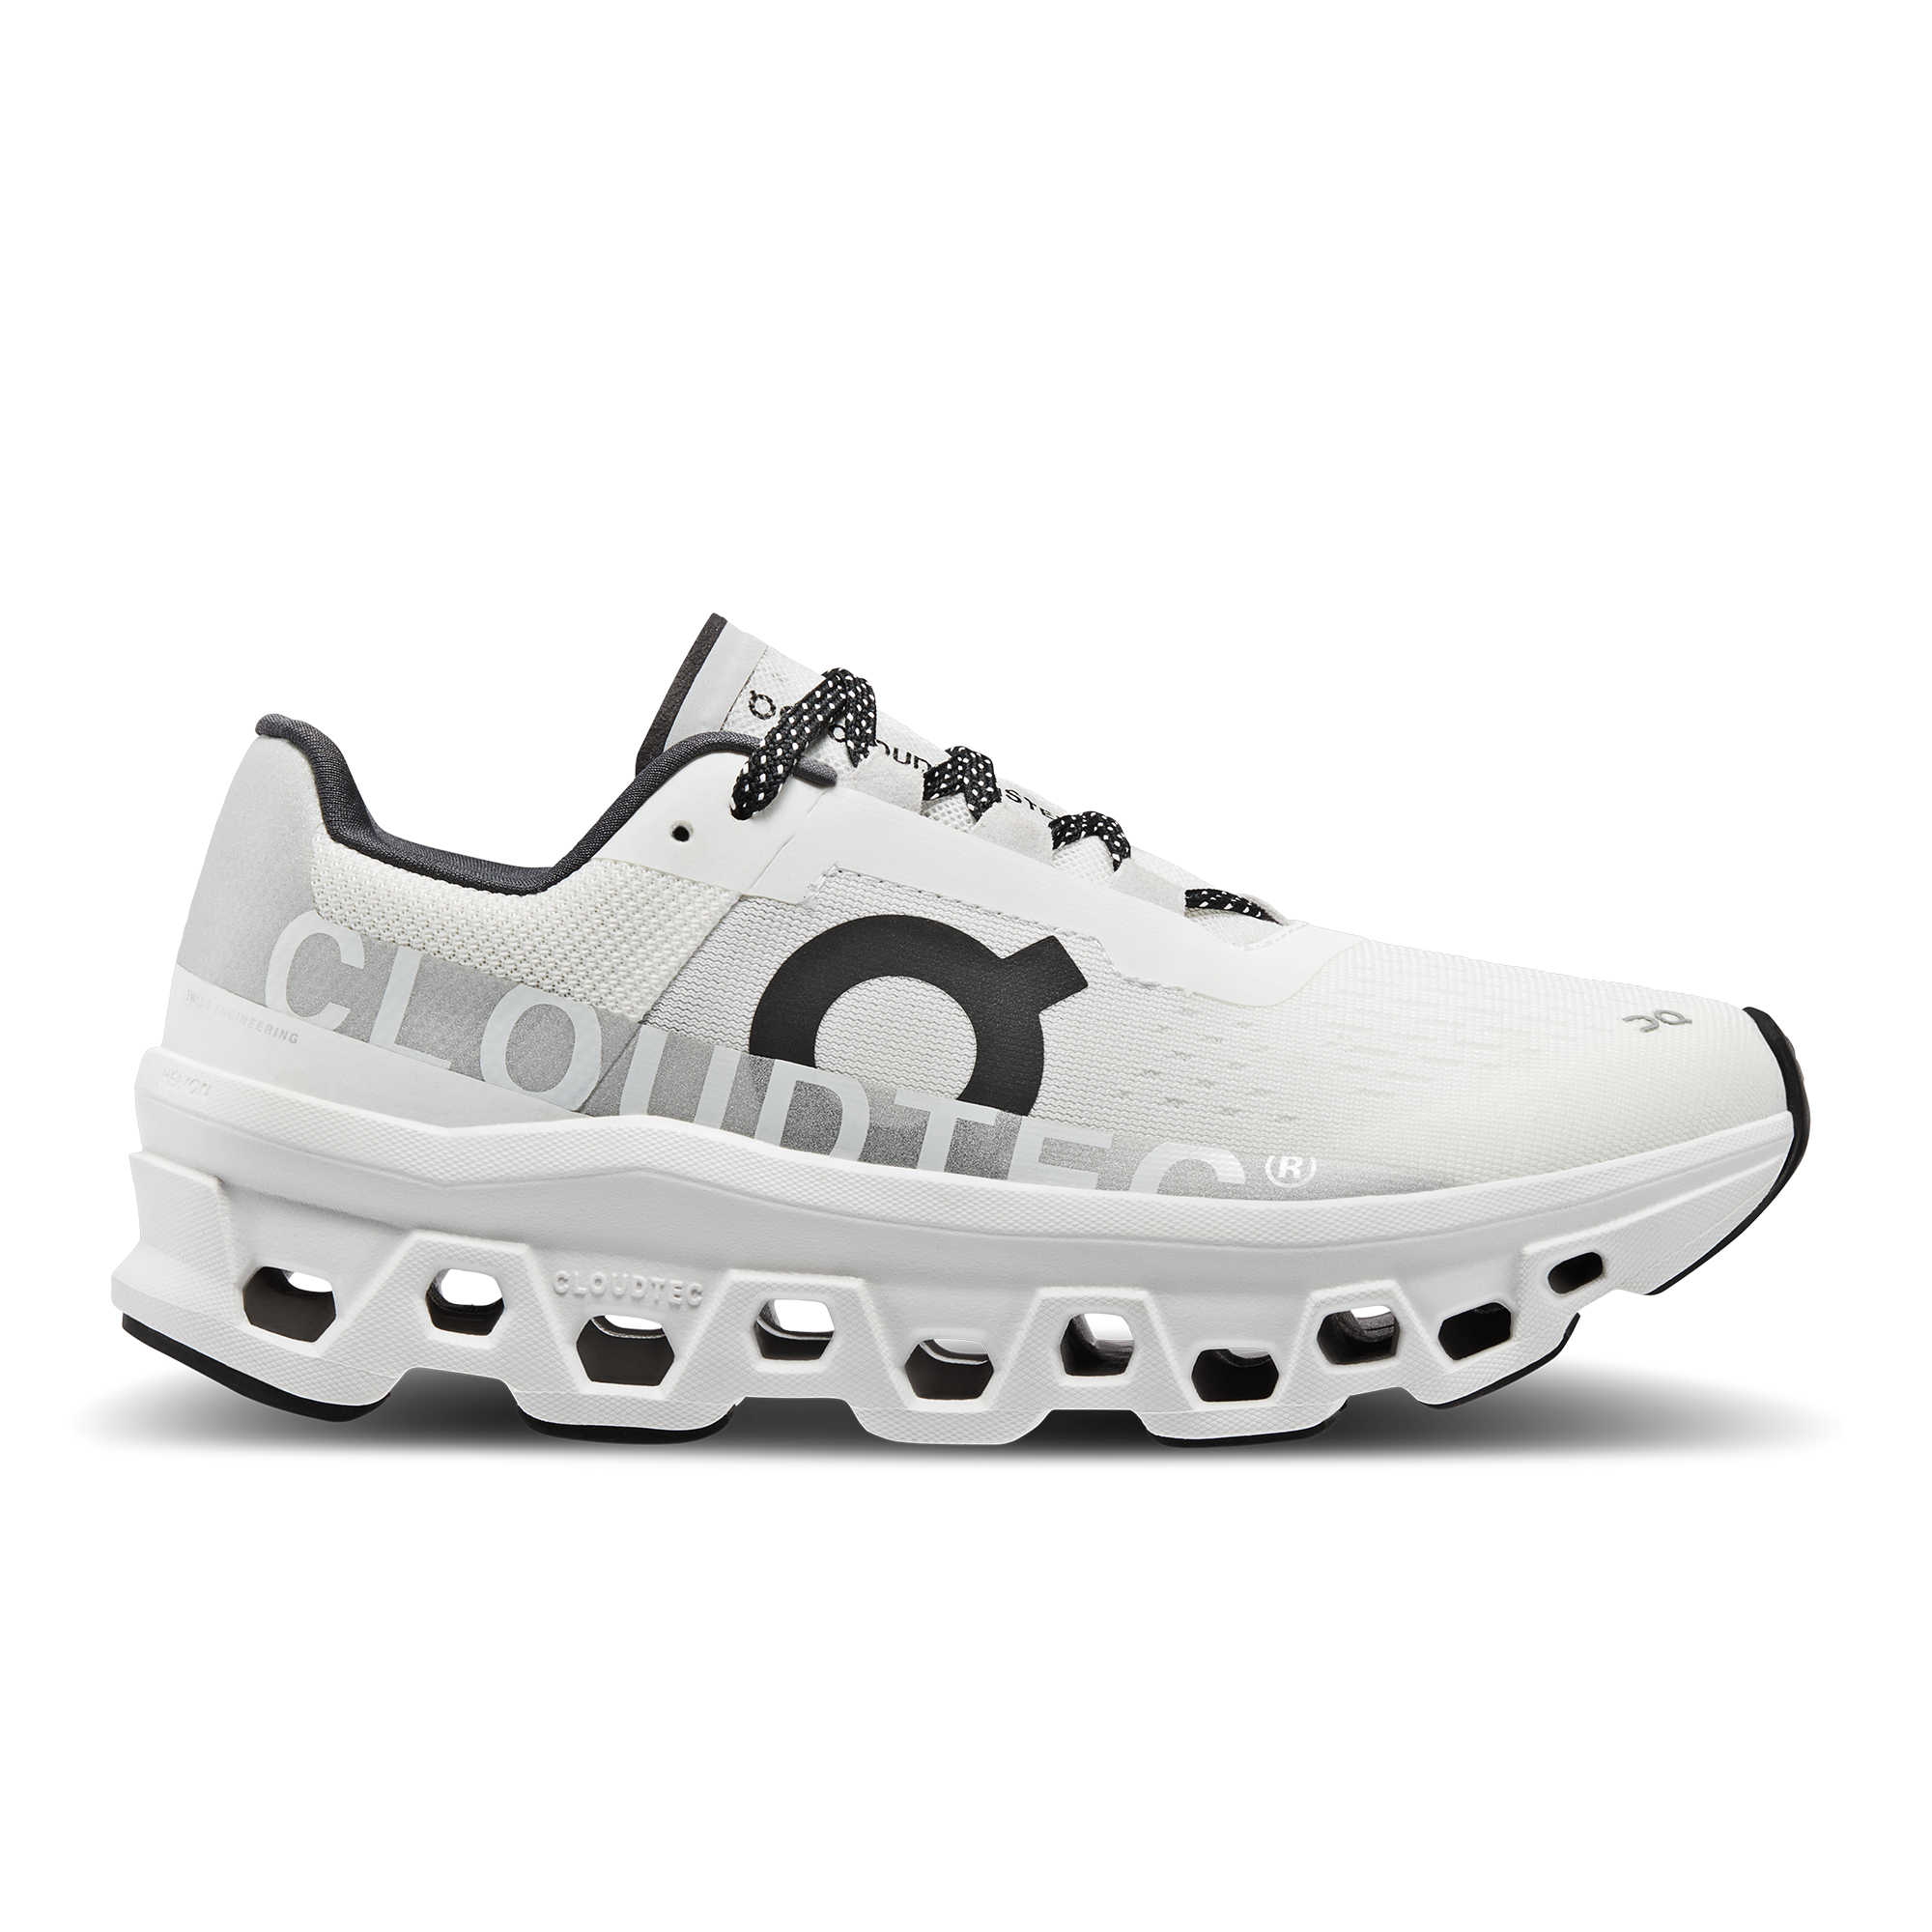 Cloudmonster - Undyed-White | White